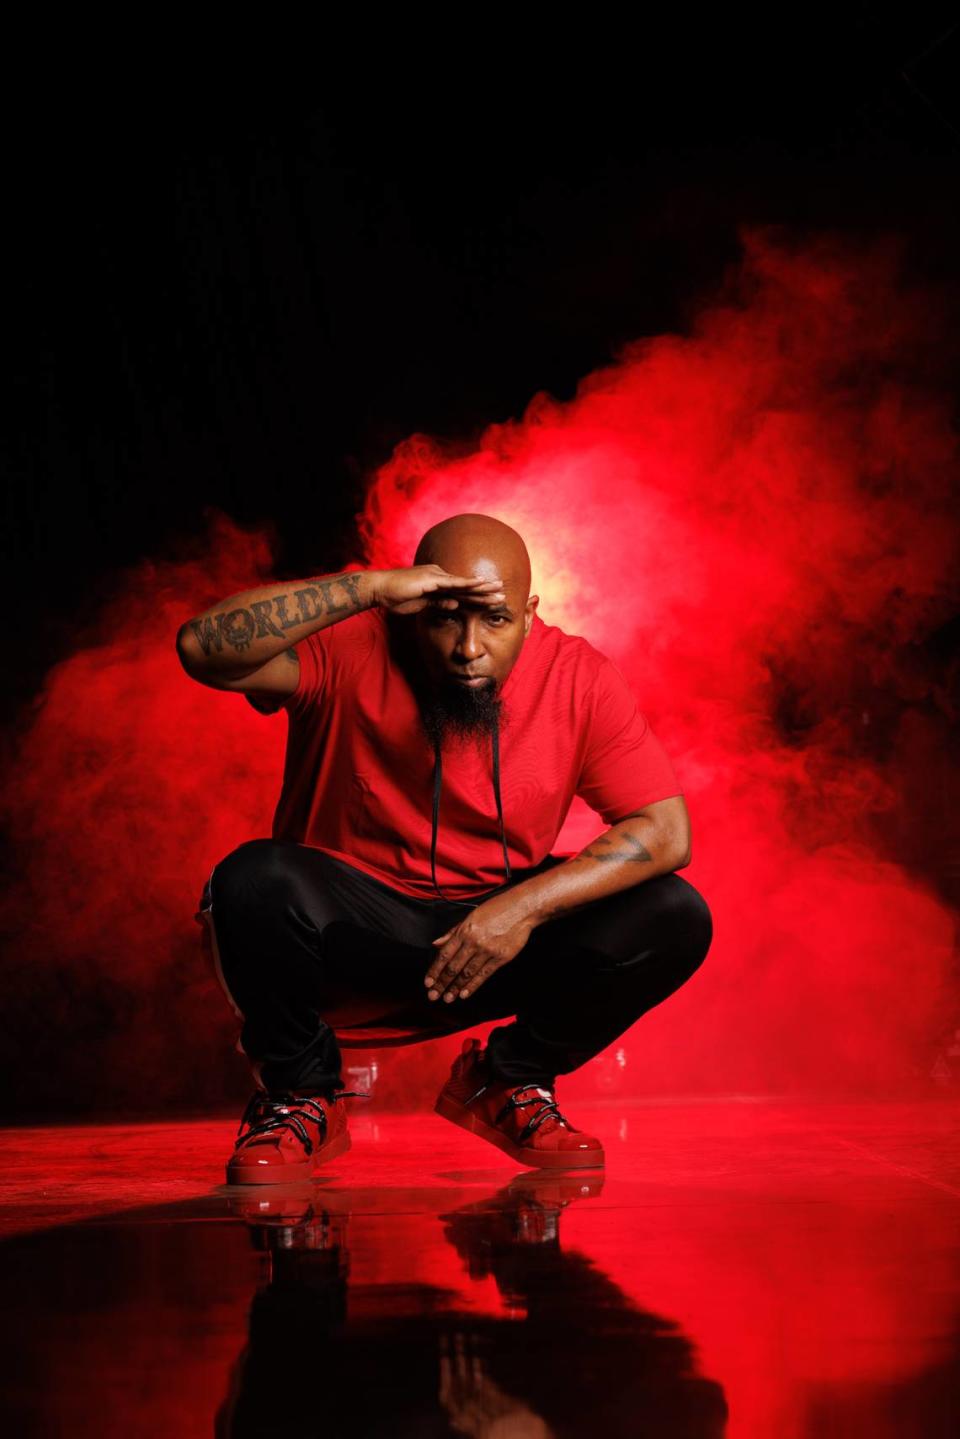 Kansas City hip-hop artist Tech N9ne will have the honor of switching on the Country Club Plaza’s lights Nov. 23. He also will perform, as will Quixotic, DJ Kirby and The Elders.